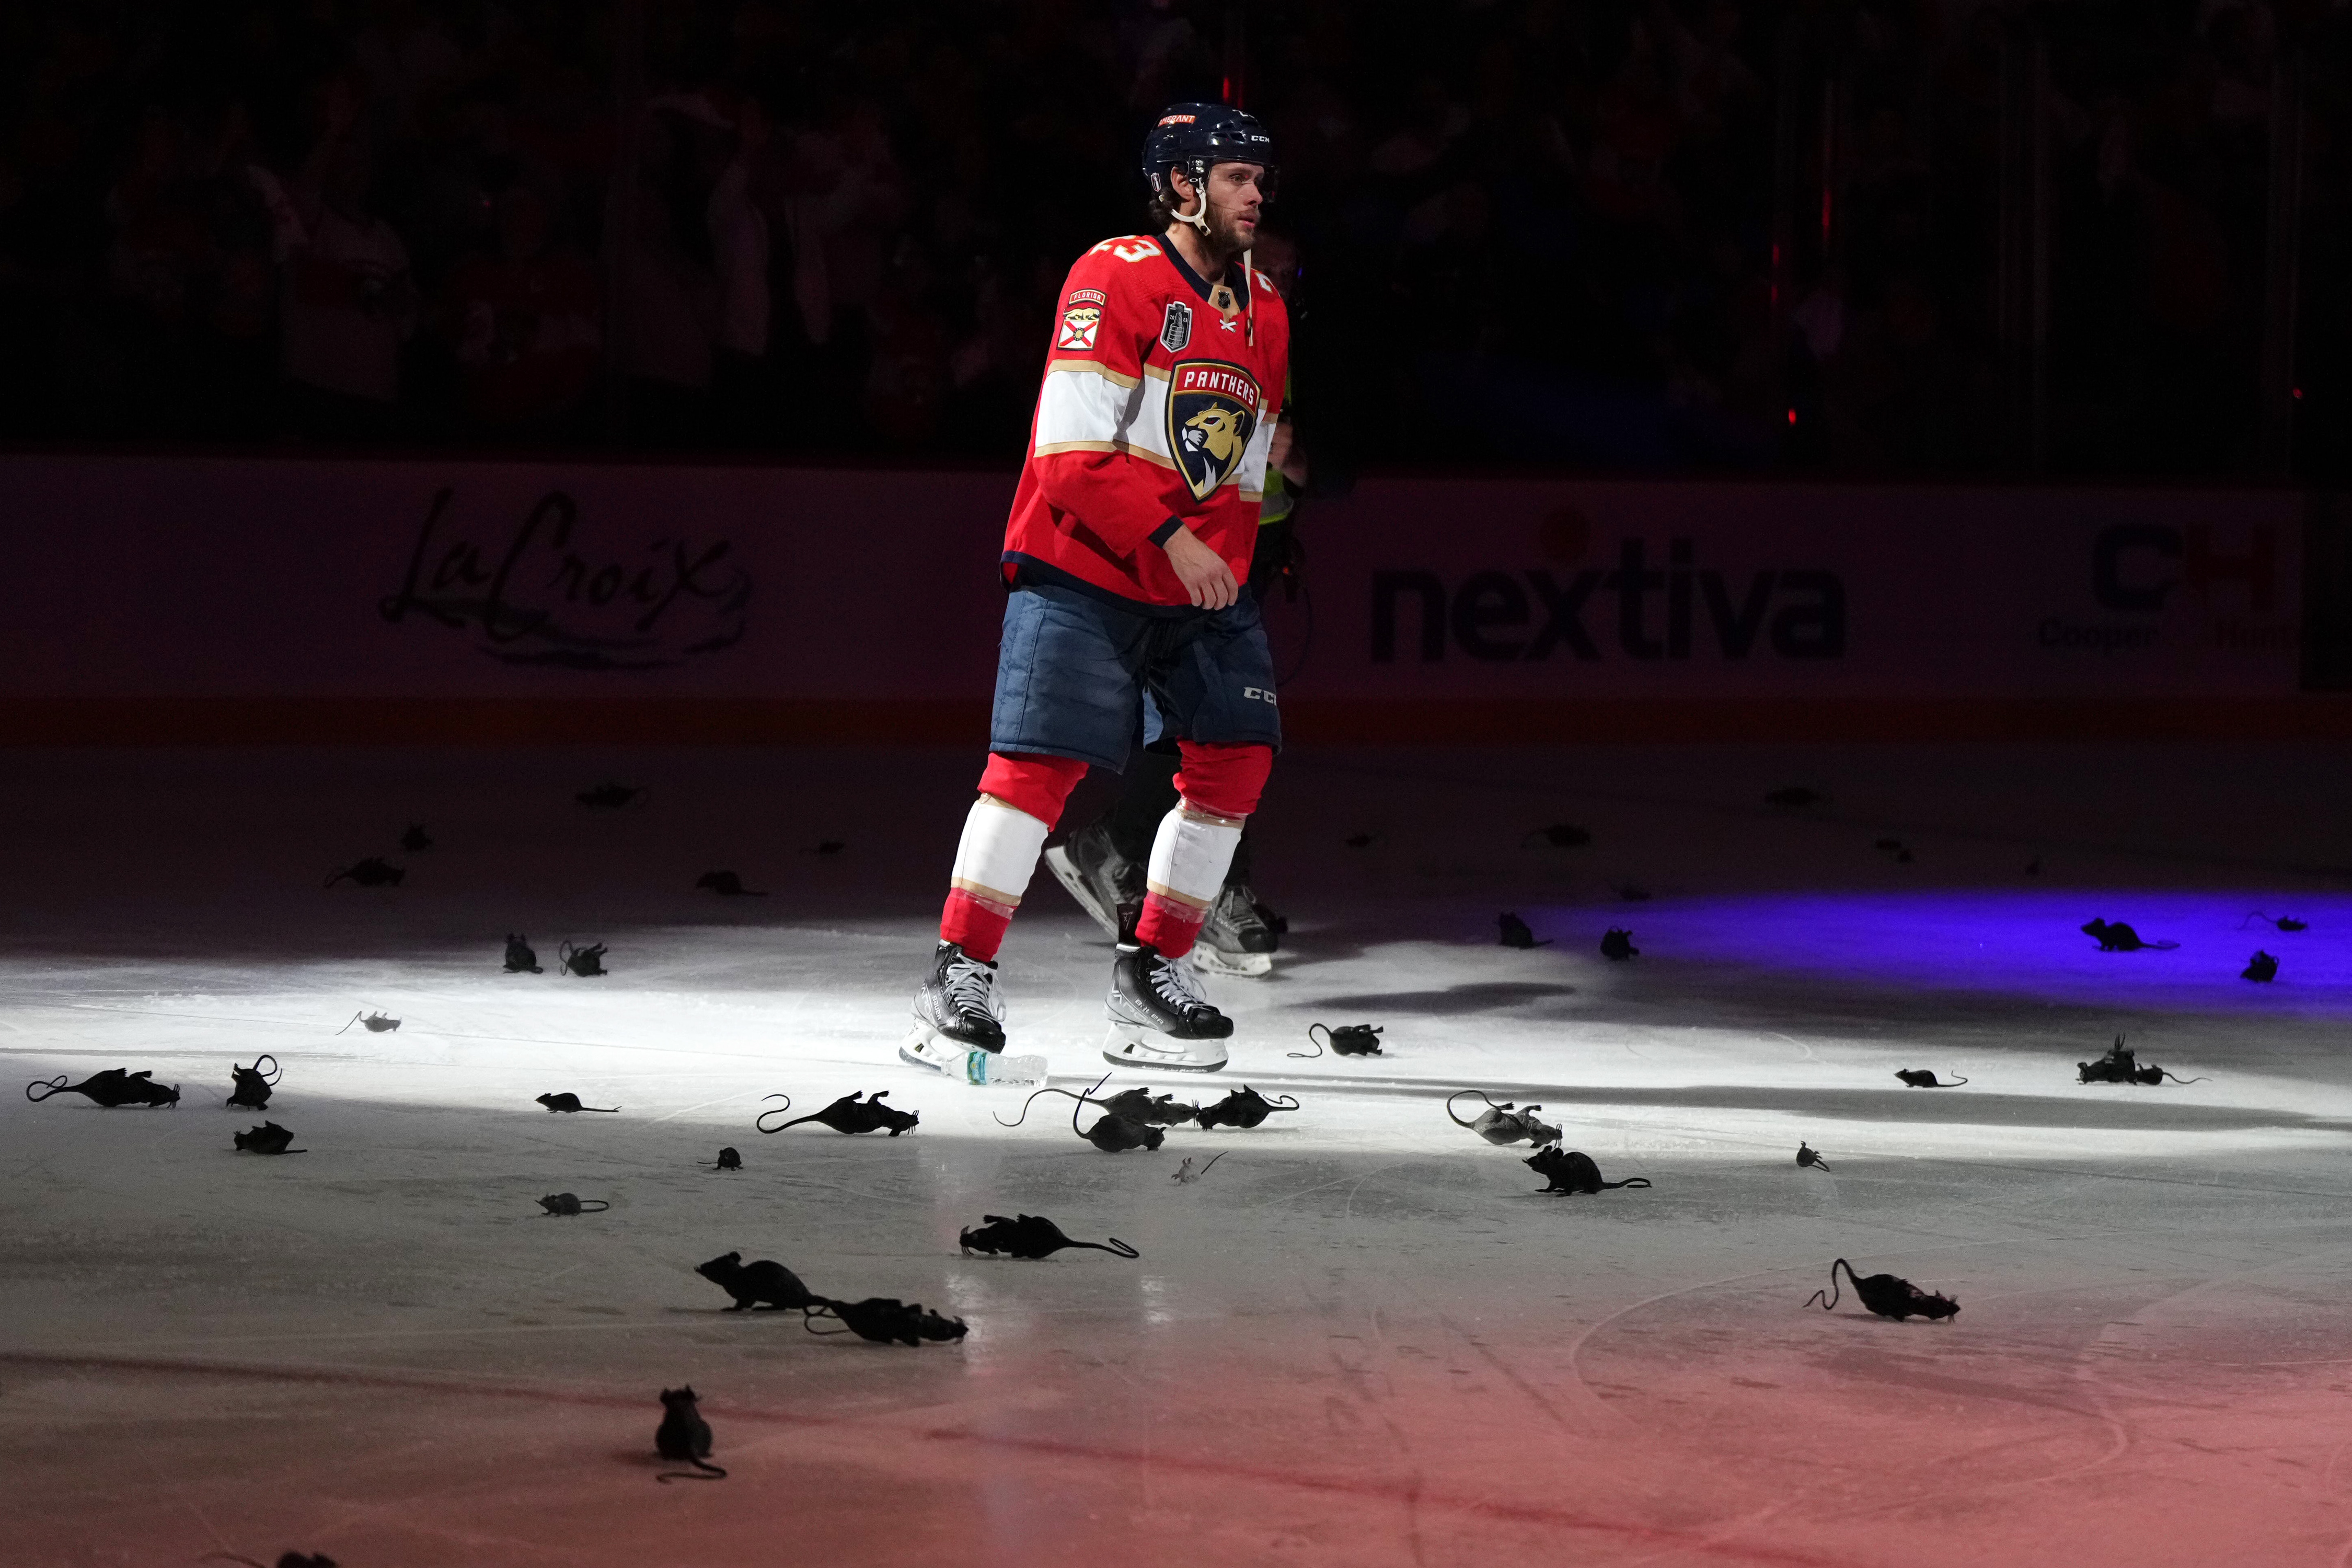 Cats Recap Show: Panthers win Game 3 in OT